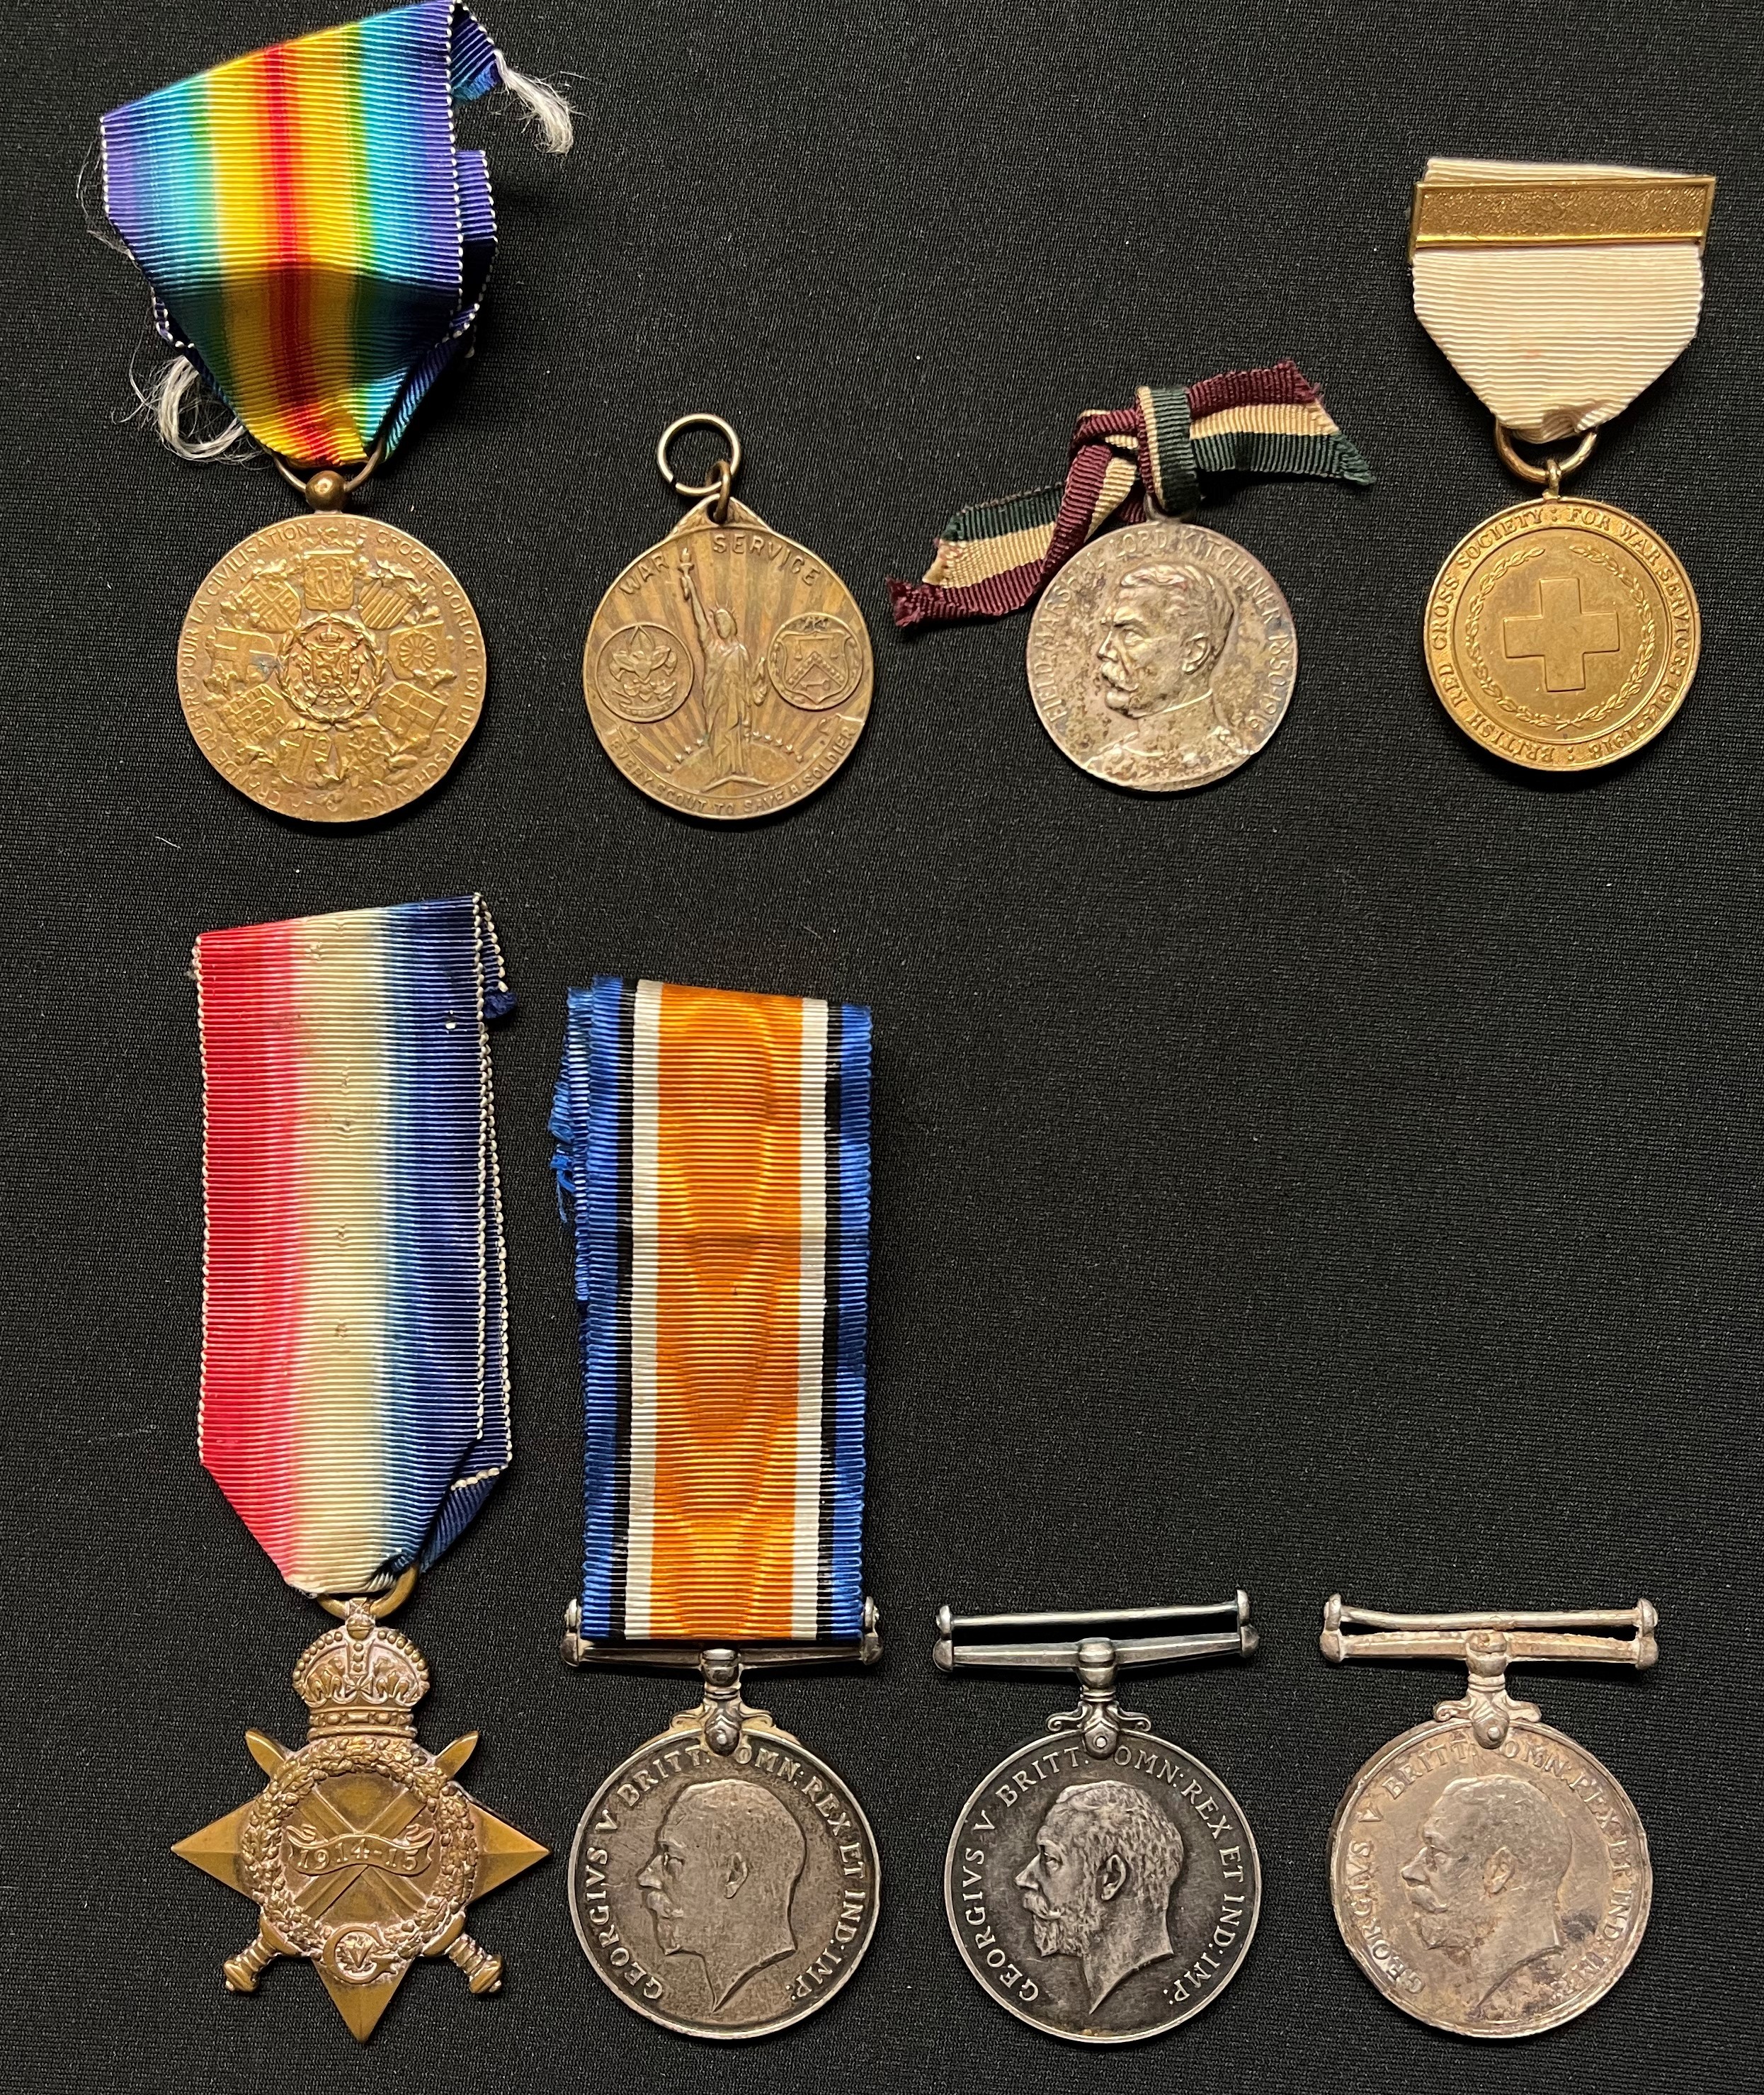 WW1 British Medal Collection comprising of: 1914-15 Star to A2991 W Forbes, SMN, RNR with ribbon: